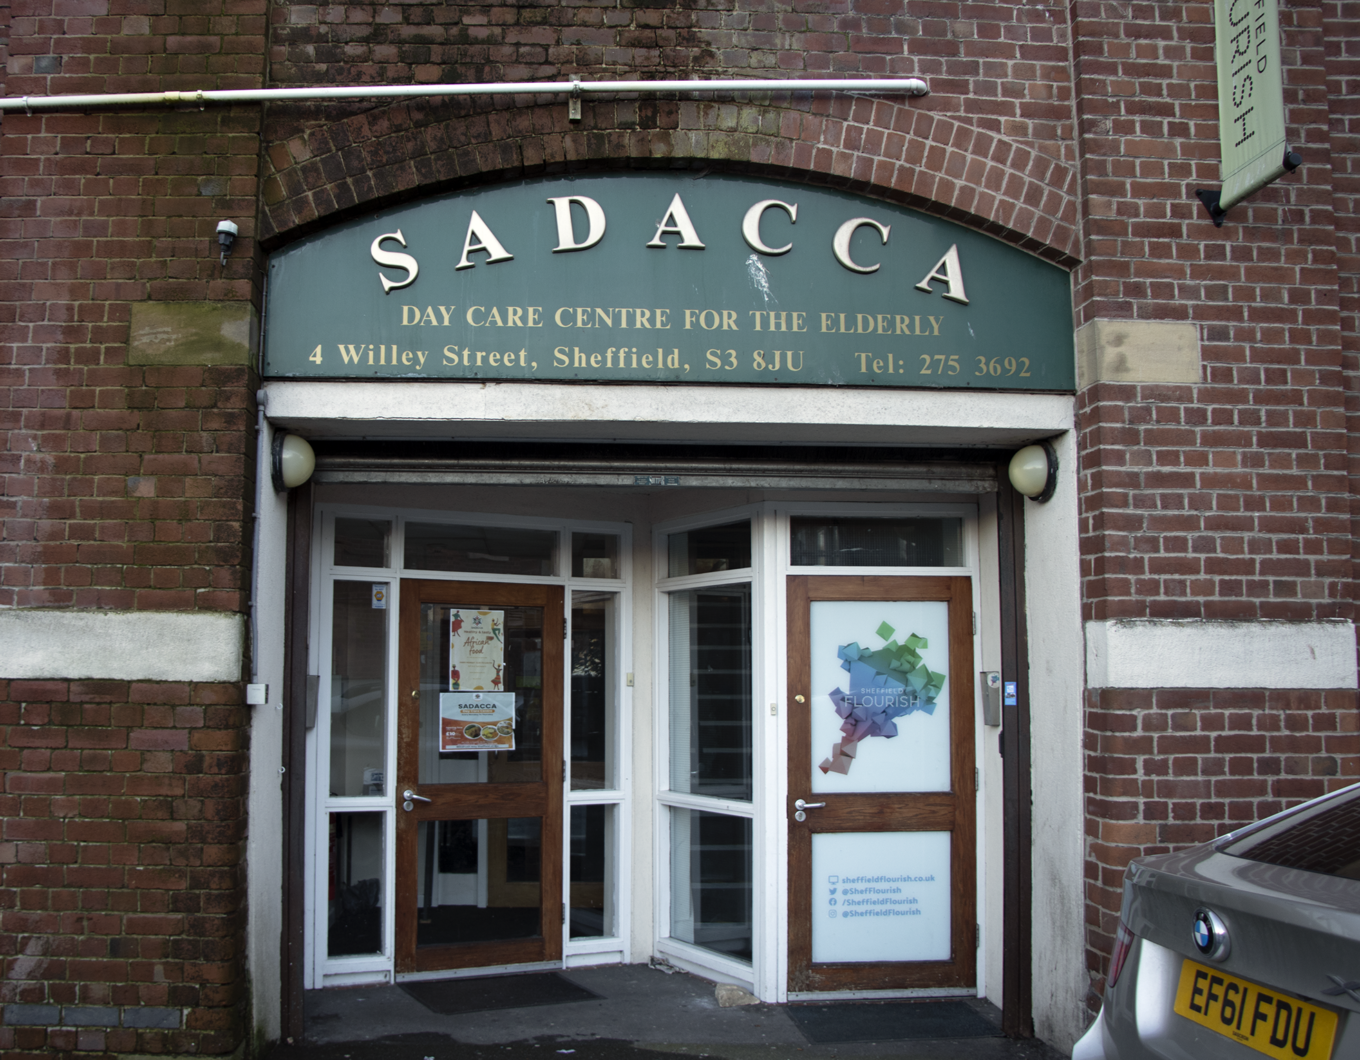 A brick building with SADACCA over the doors